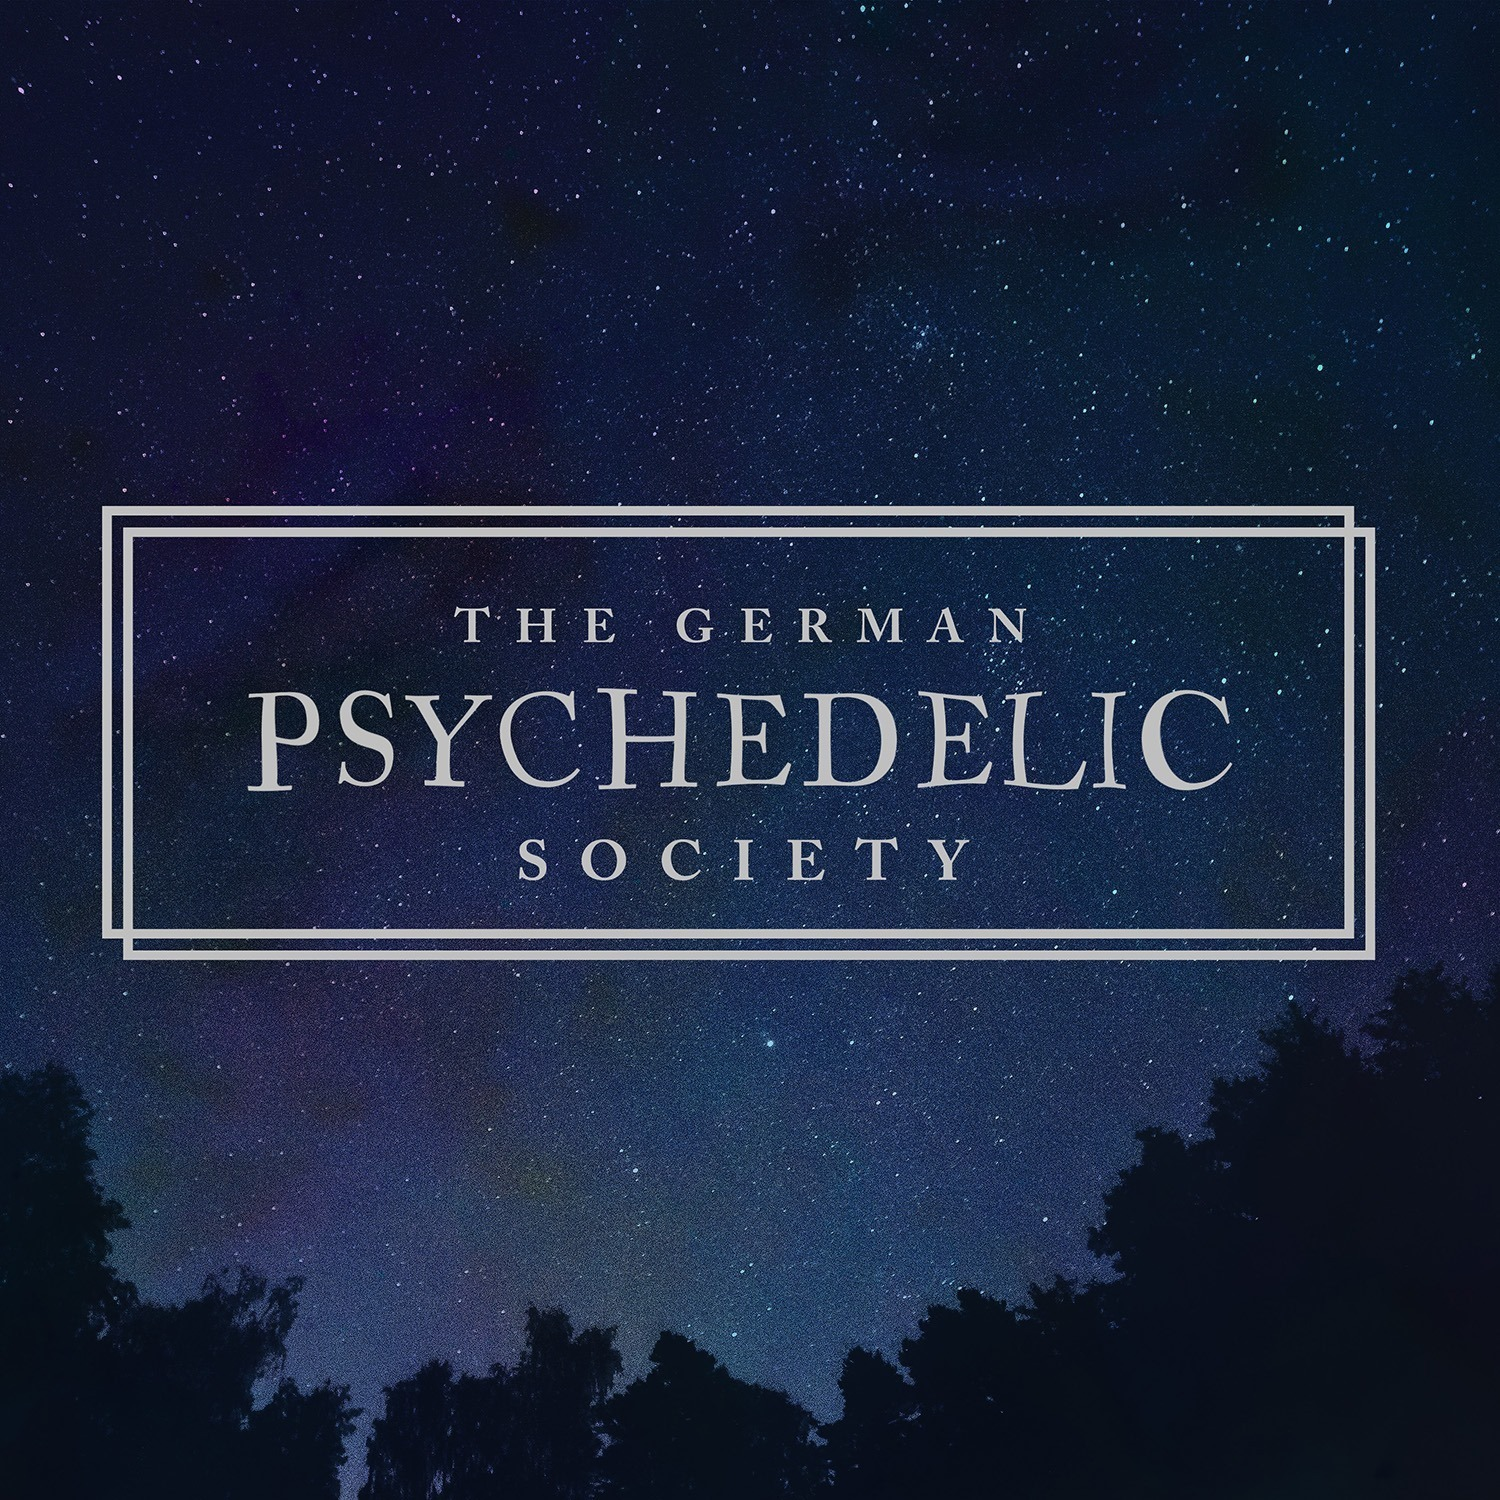 The German Psychedelic Society